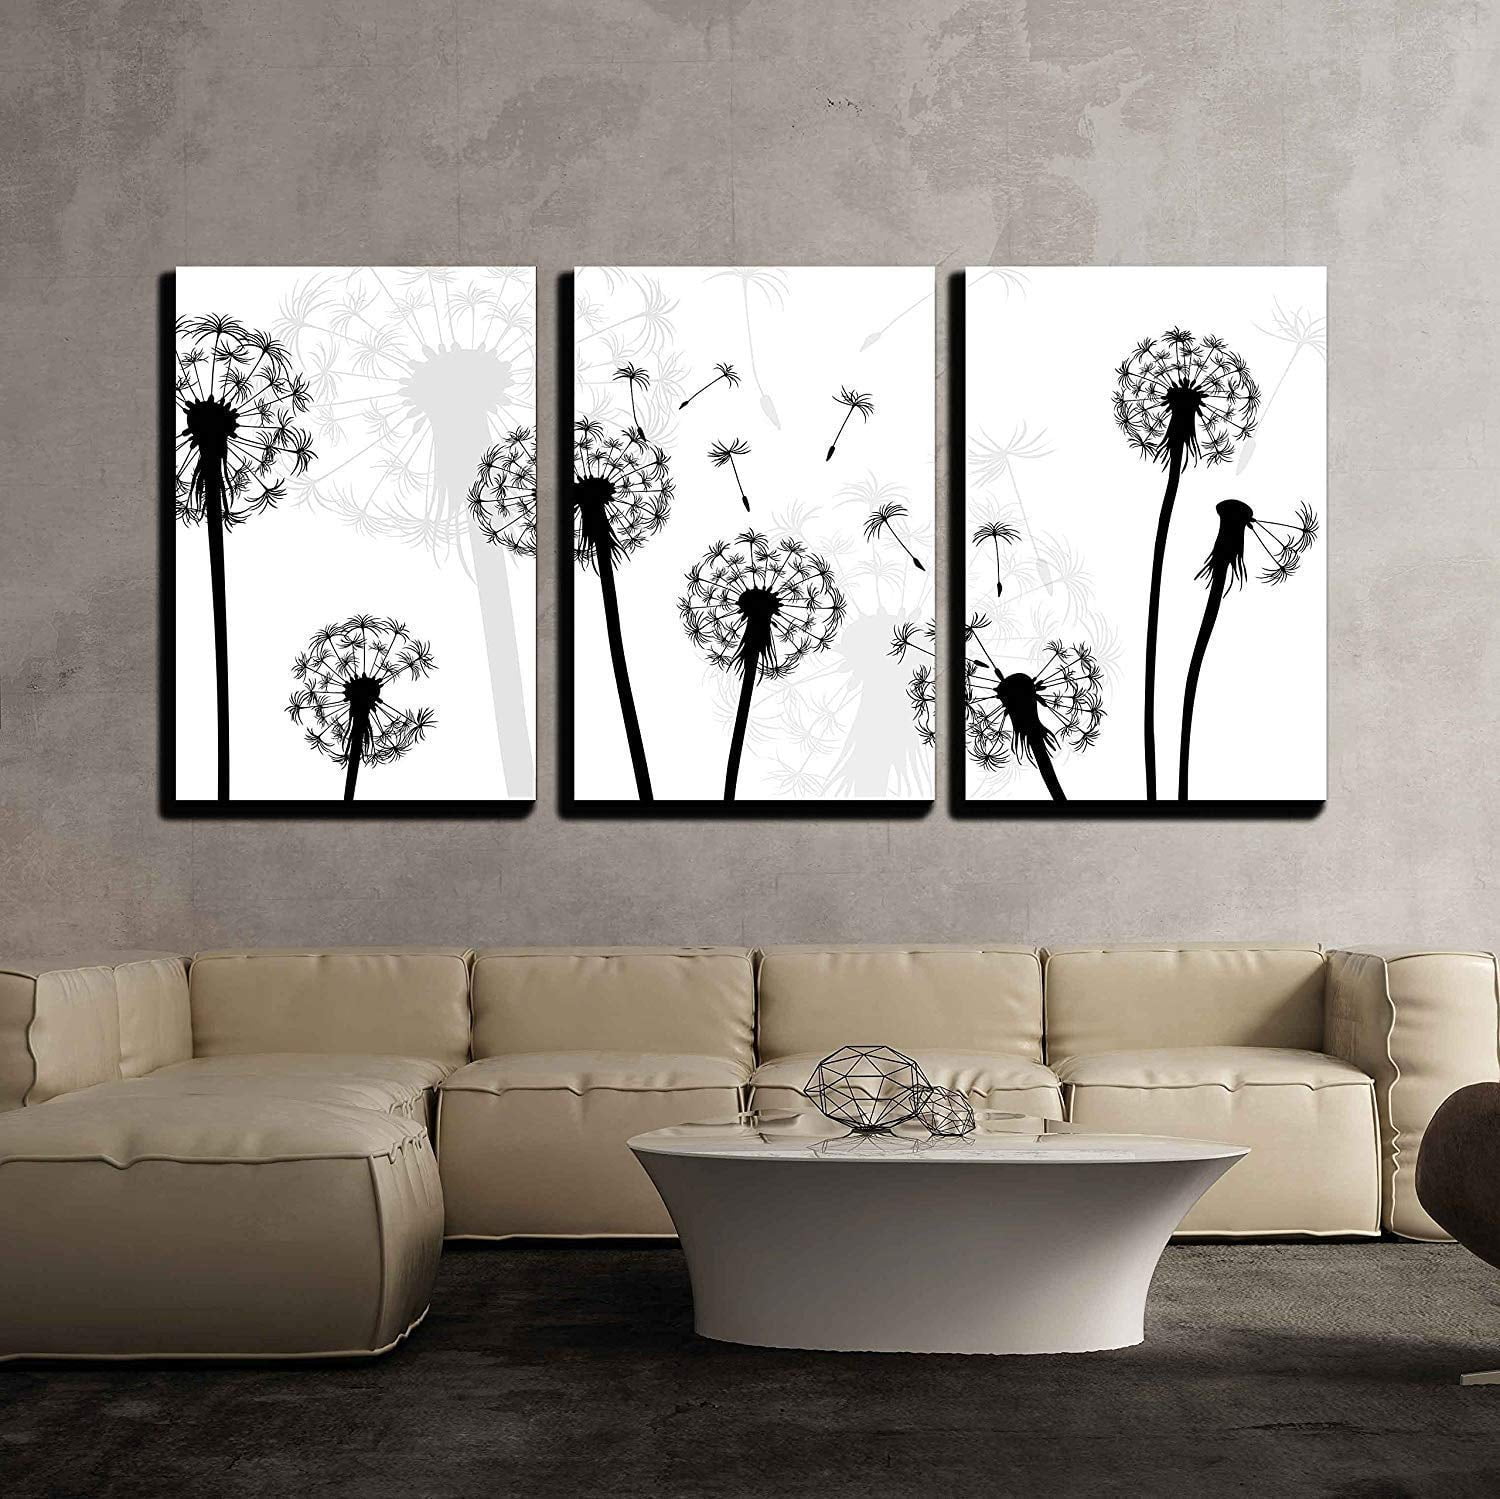 3Pcs Black And White Tree Picture Paint Canvas Painting Modern Art Wall Decor 